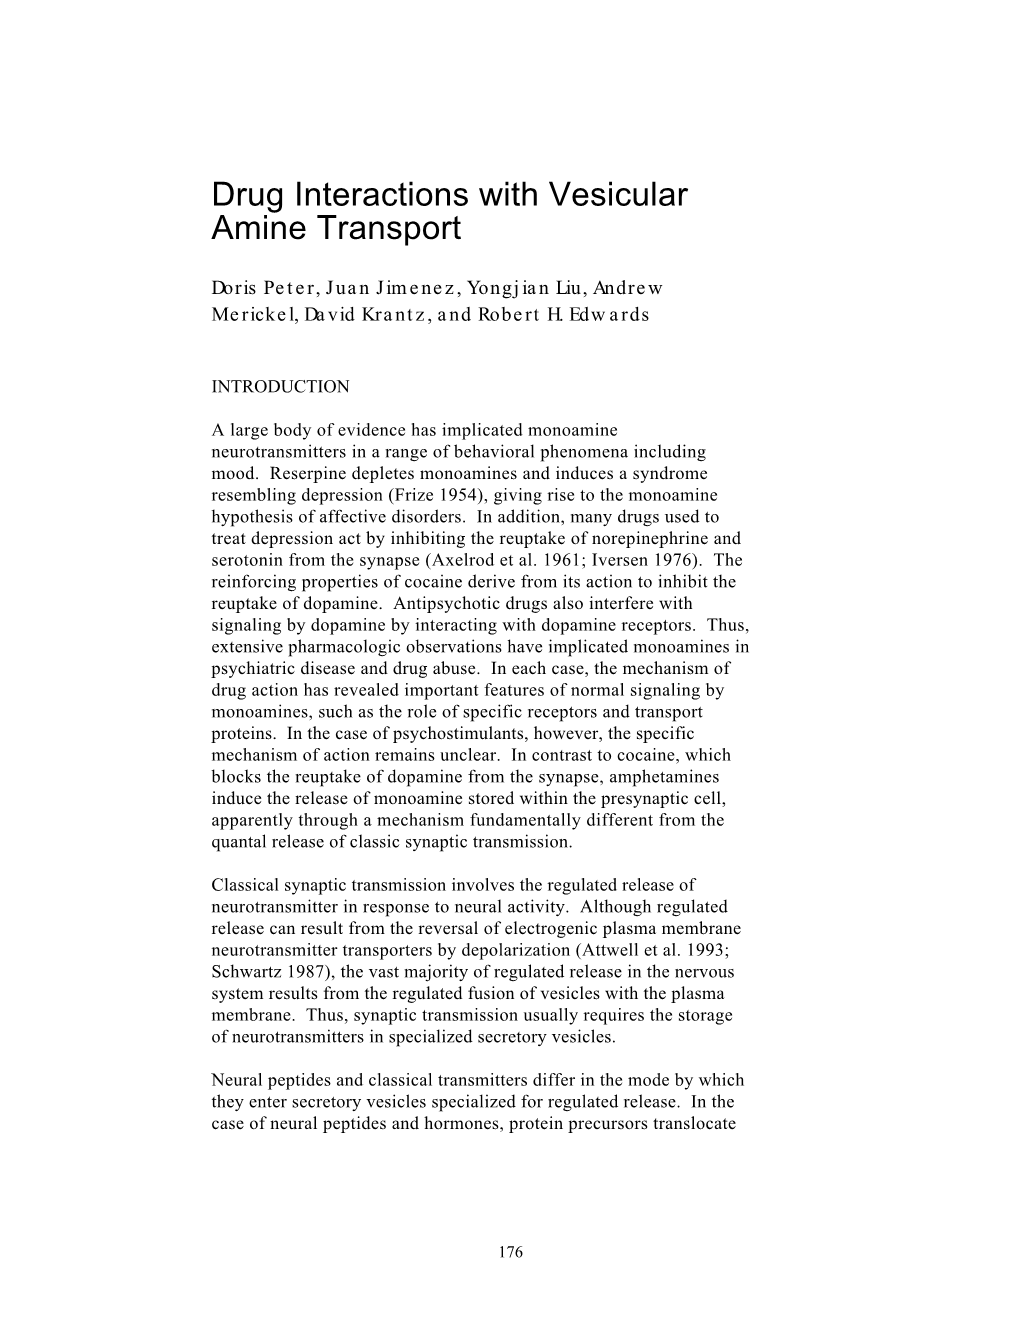 Drug Interactions with Vesicular Amine Transport